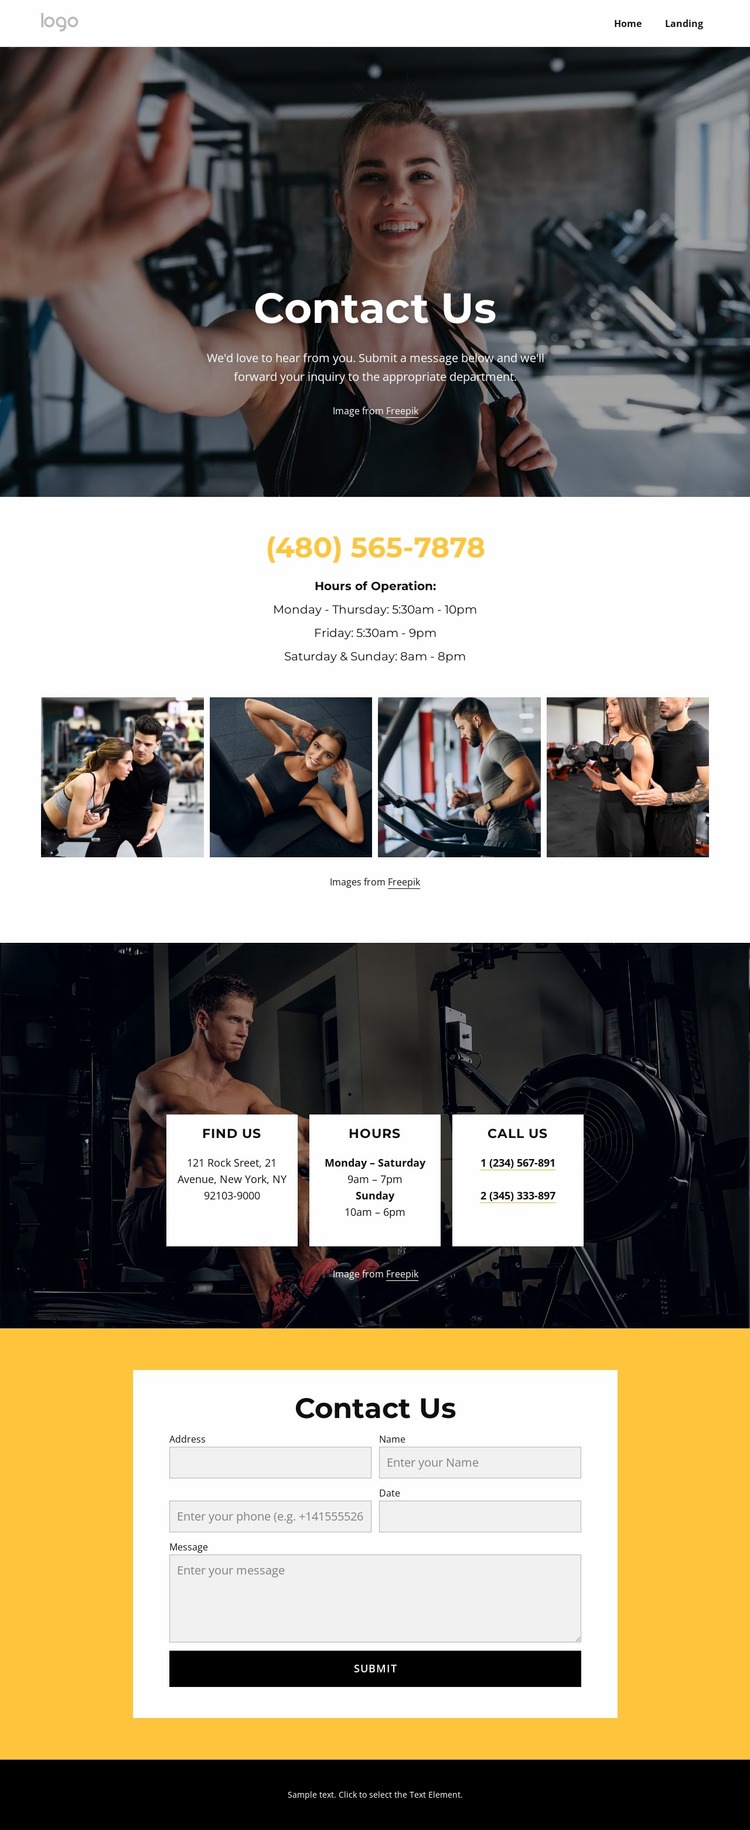 Personal training, group classes Website Mockup